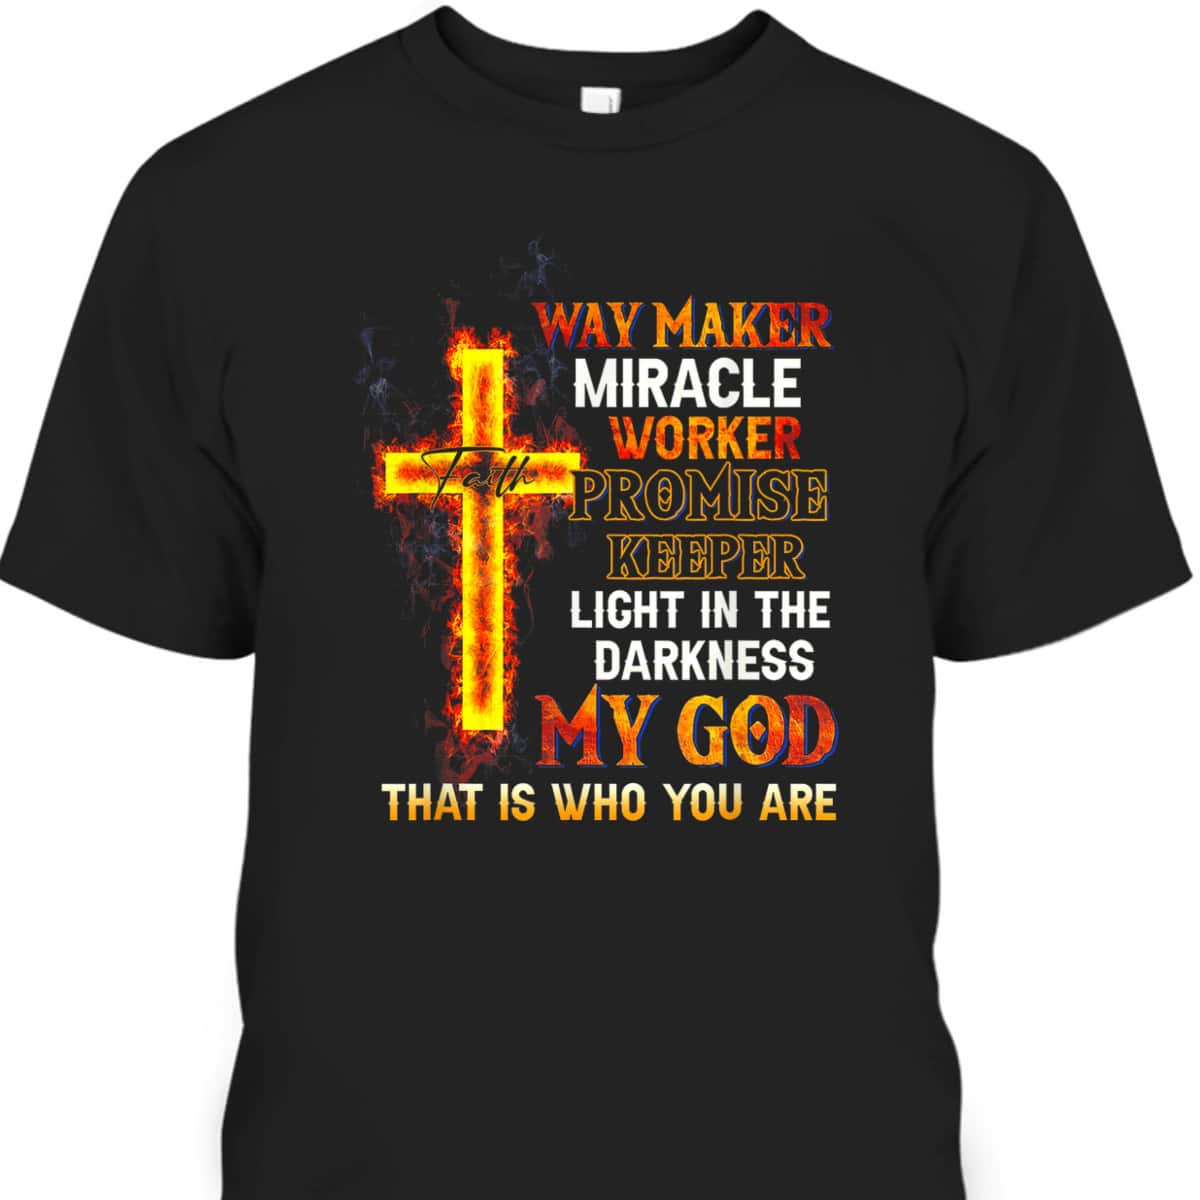 Waymaker Miracle Worker Promise Keeper Light In Darkness Perfect T-Shirt For Believers